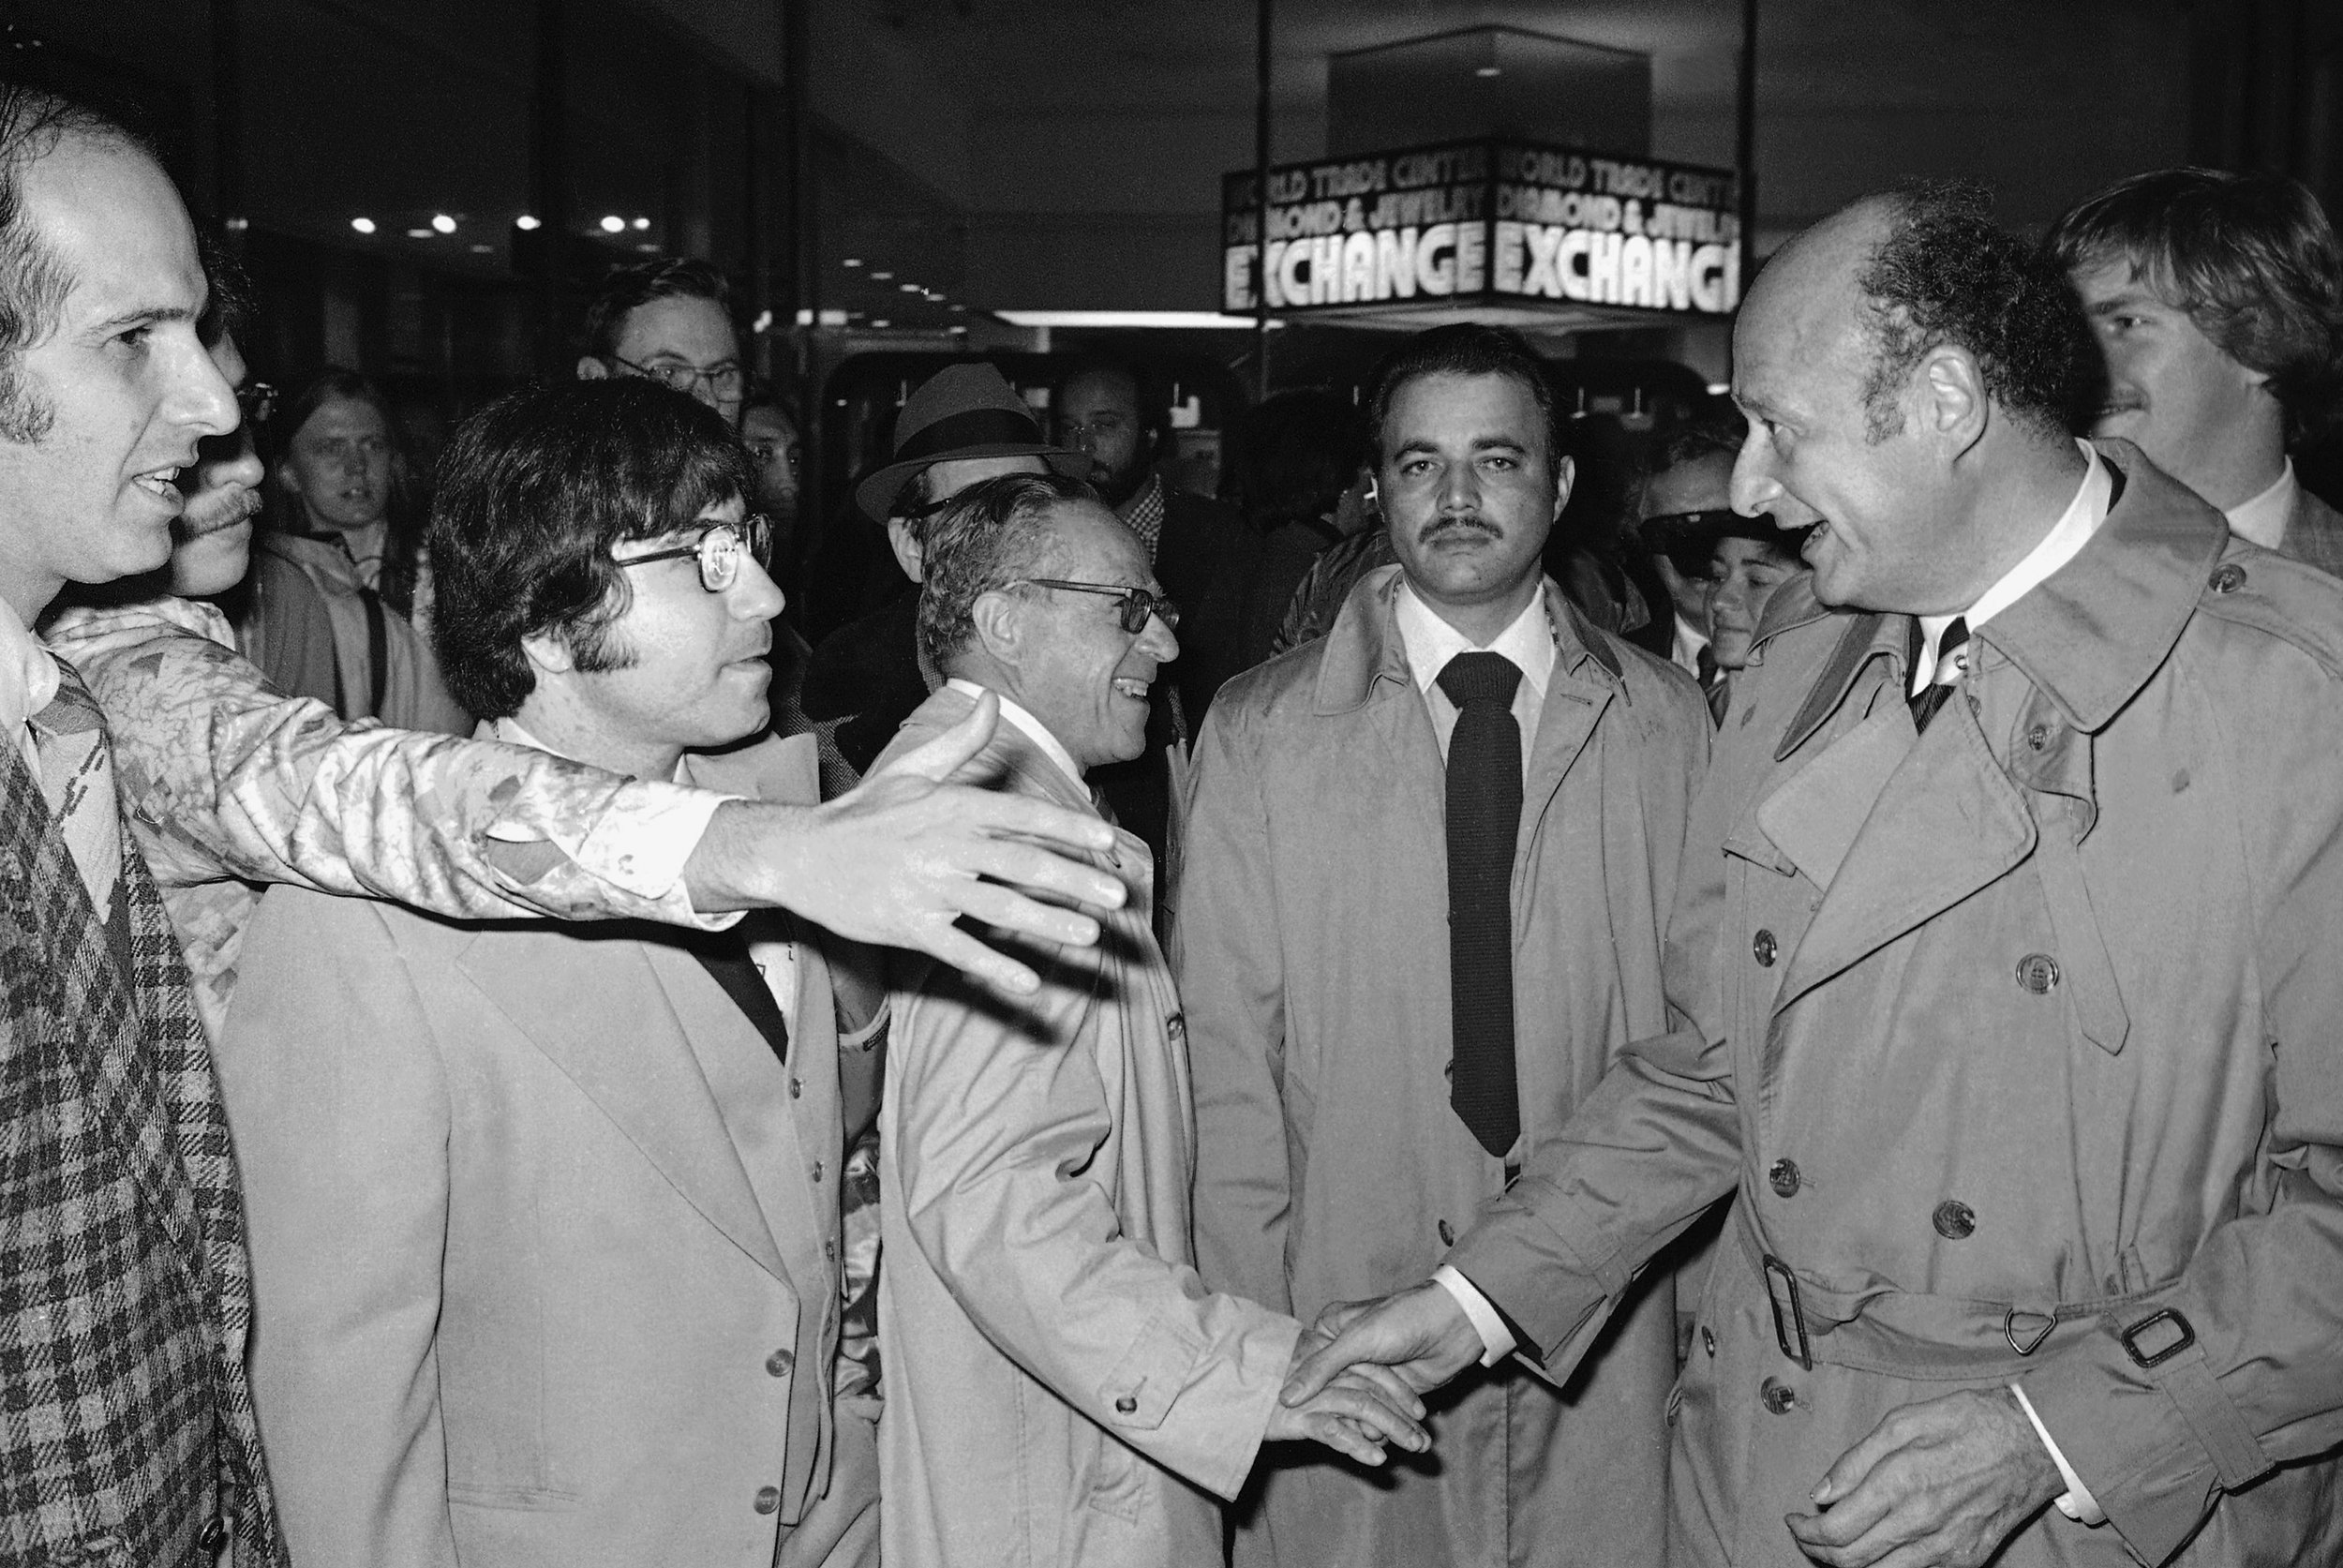  Ed Koch, democratic candidate for Mayor of New York City, right, shakes hands with his constituents at the World Trade Center in Manhattan, Monday Nov. 7, 1977. Candidates are doing some last minute campaigning before Tuesday?s election. (AP Photo/C